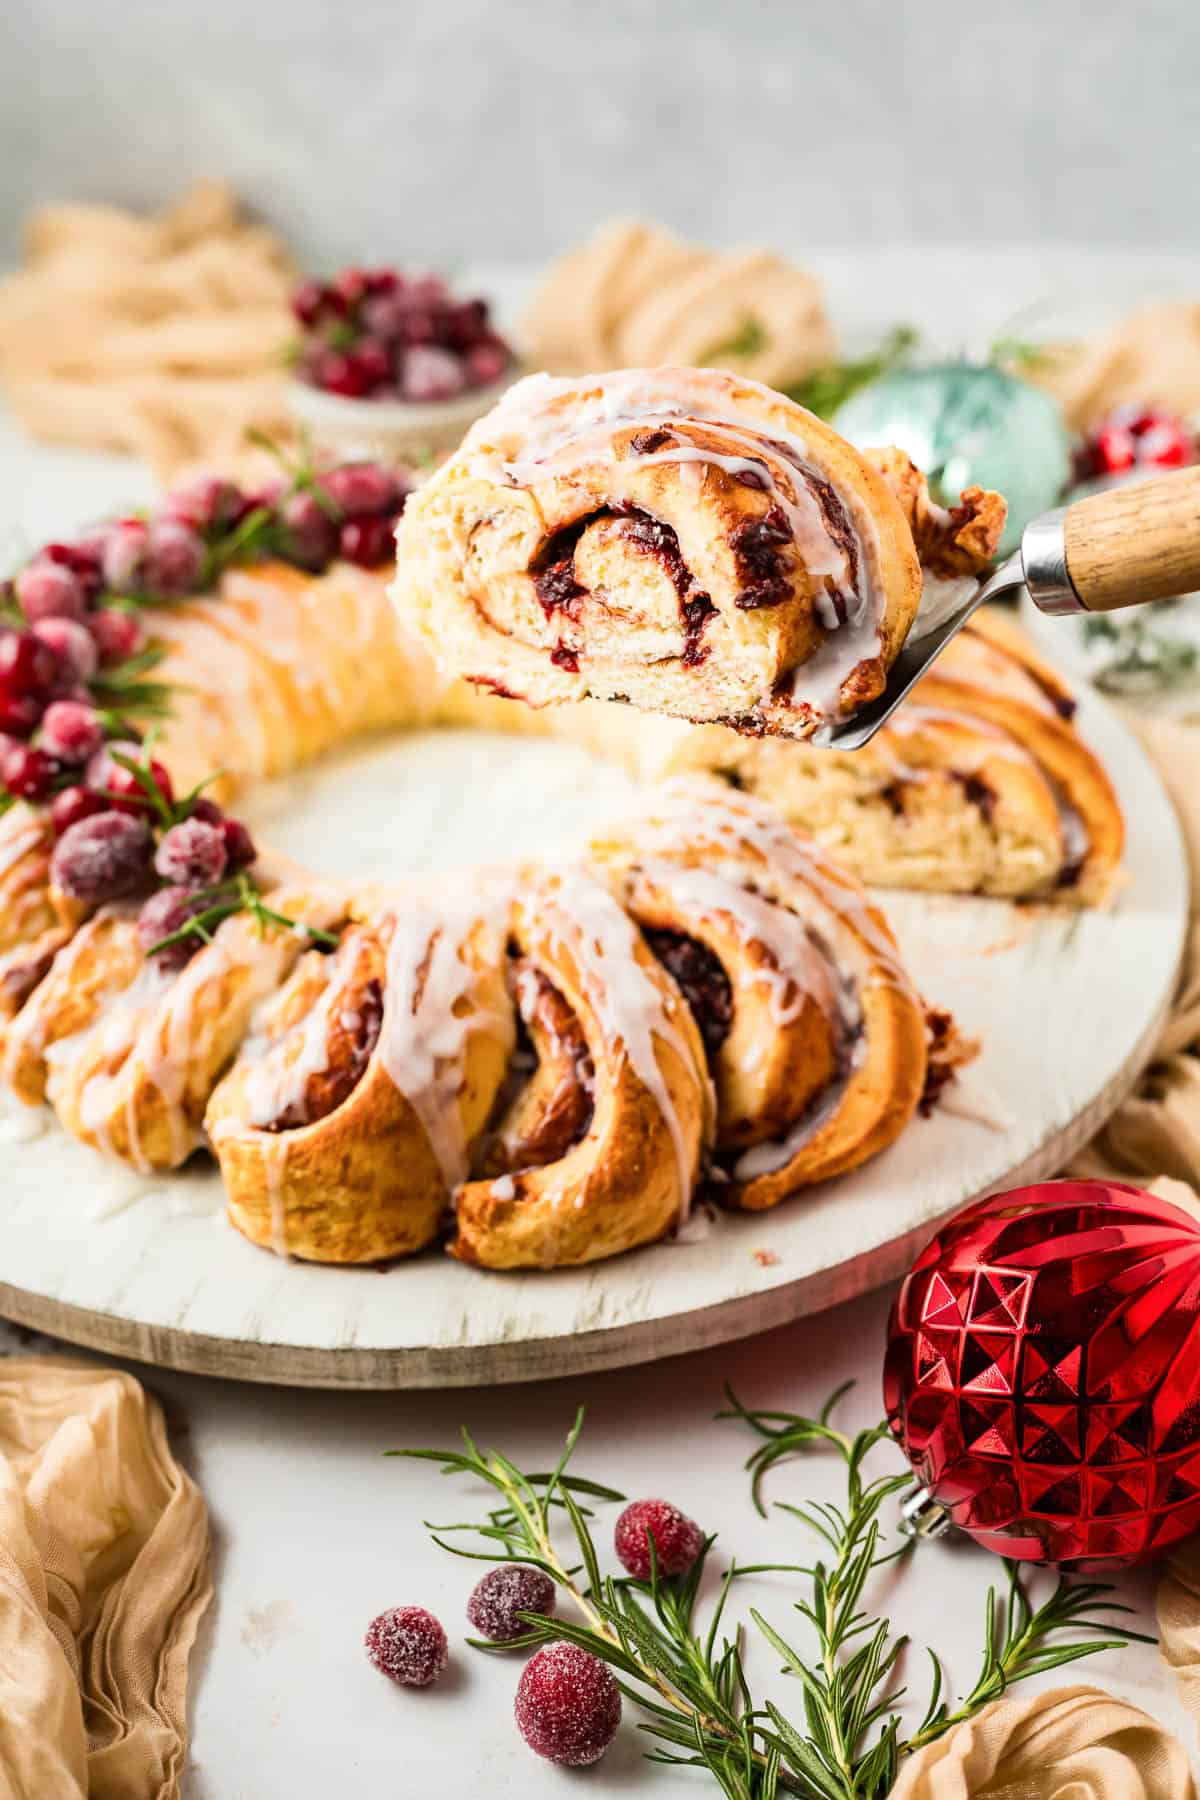 A serving of Orange Cranberry Cinnamon Roll Wreath being lifted up on a server over the remaining wreath.